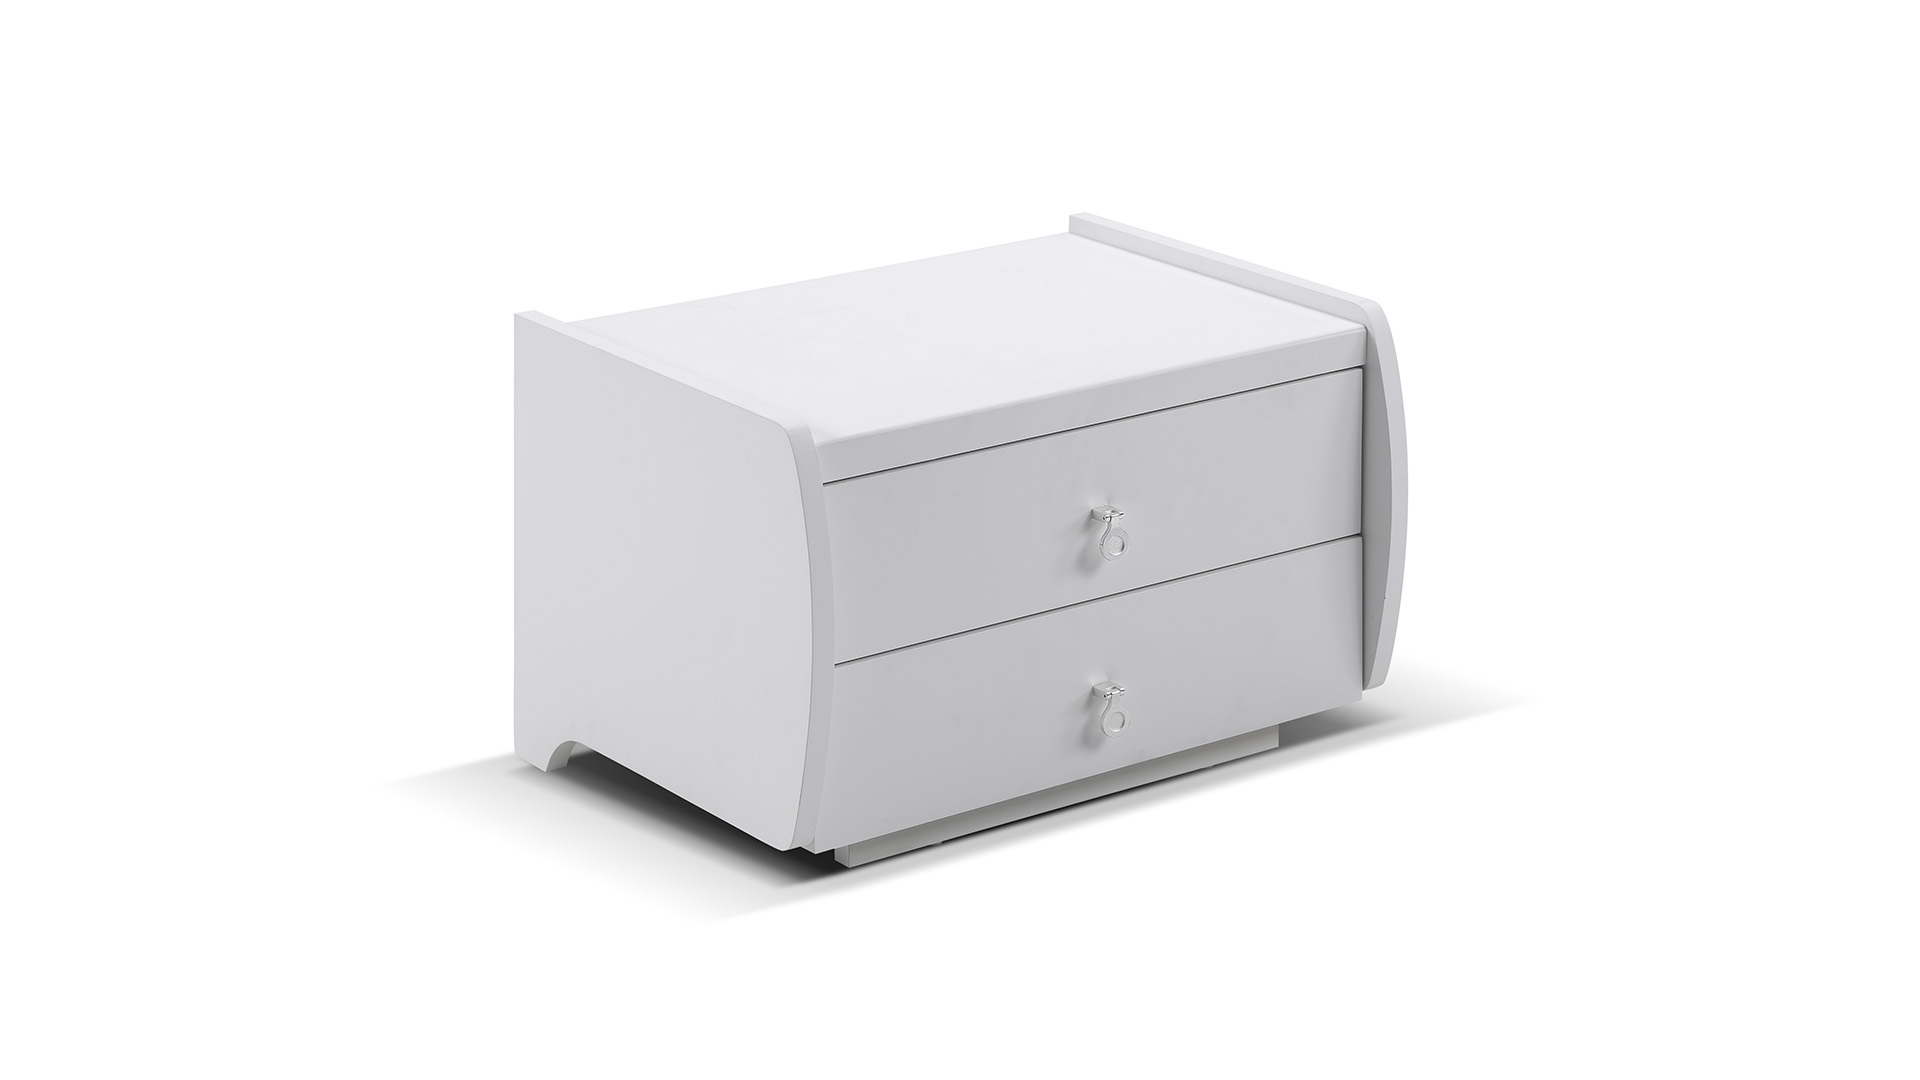 <p>Material:</p><p>*Solid wood+MDF board+white high glossy</p><p><br/></p><p>Size:</p><p>*550*400*360mm</p><p><br/></p><p>Number of drawers:</p><p>*2 Drawers</p>